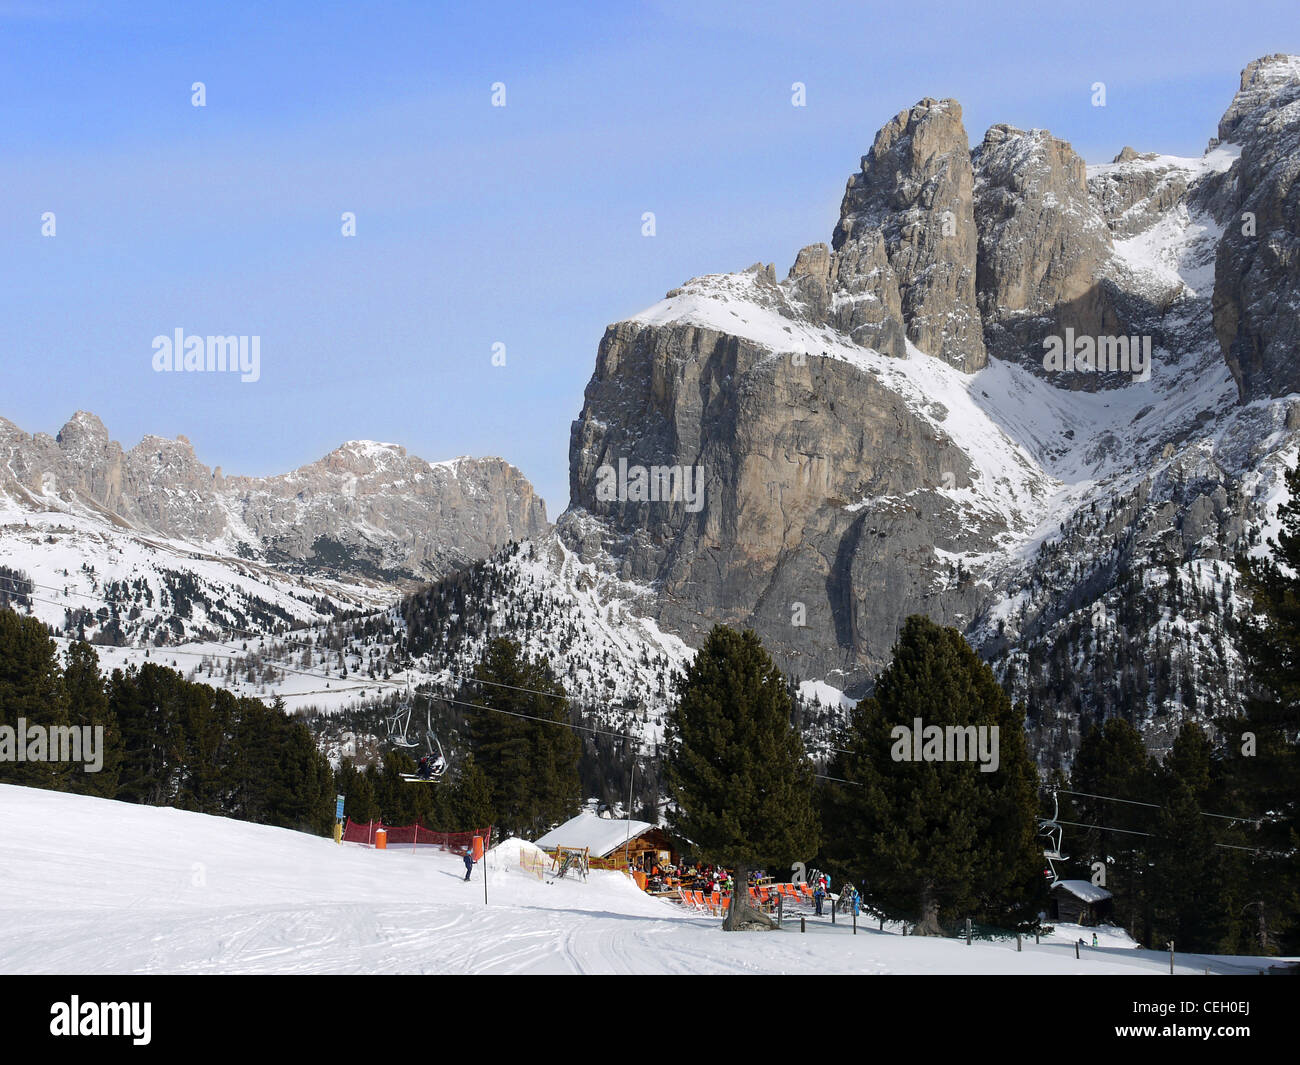 Ski resorts in the Italian Dolomites, showing the central core of mountains of the circuit Stock Photo